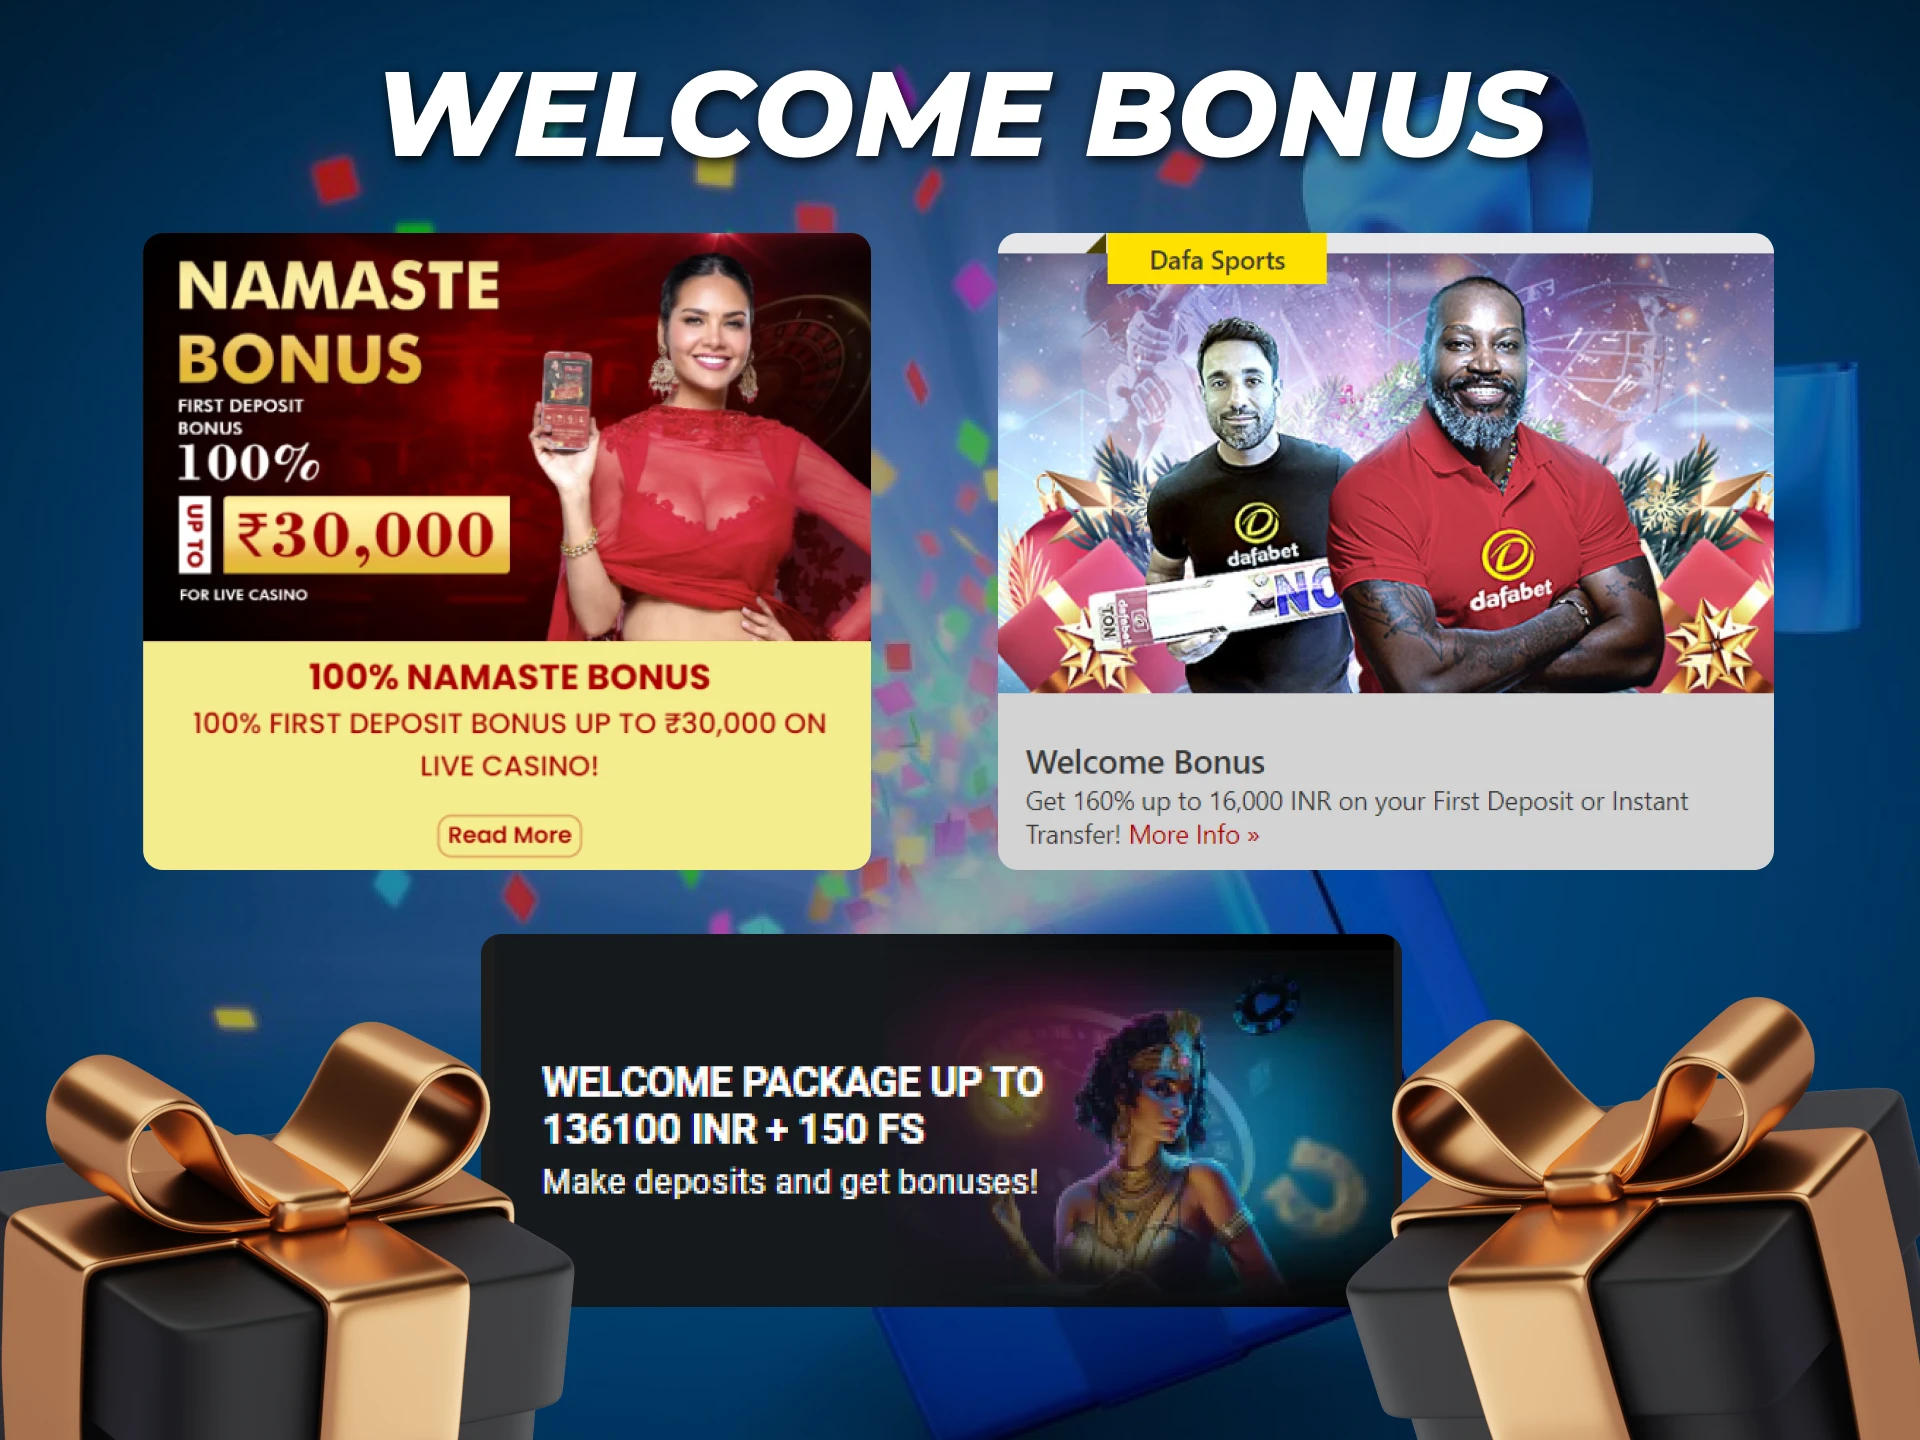 Once you register and make a deposit on the betting app, you can receive a lucrative welcome bonus.